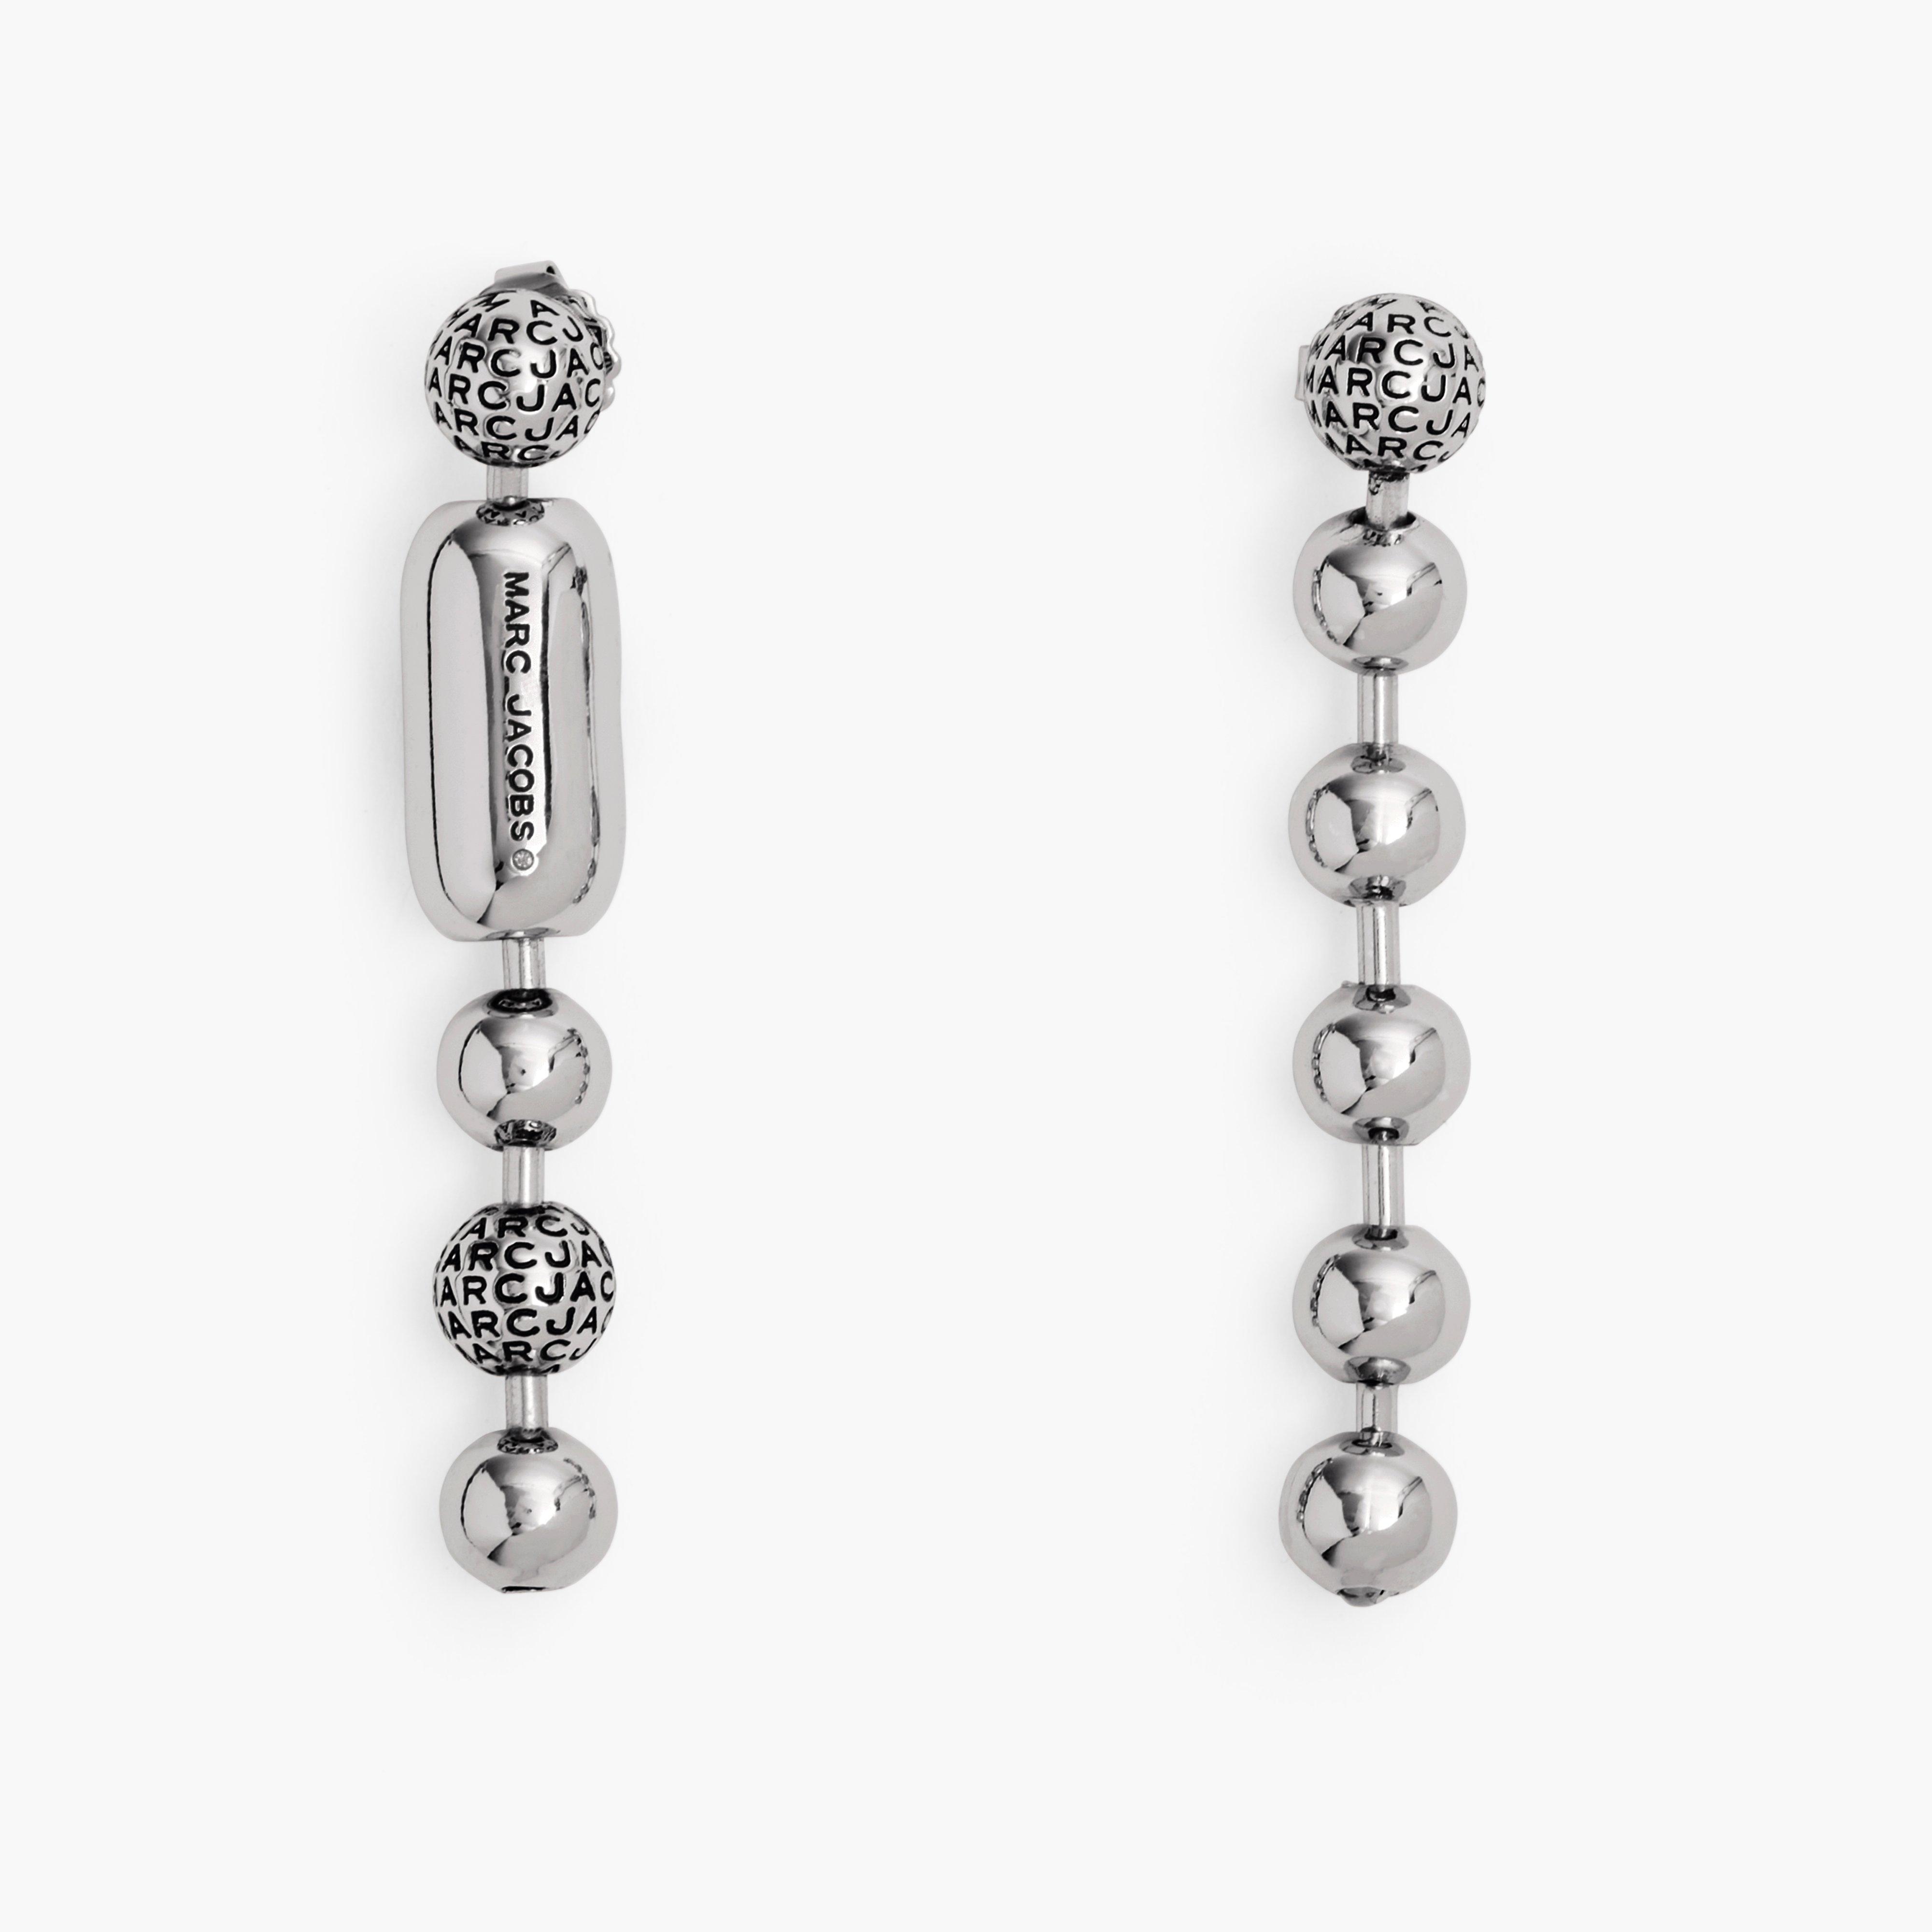 Marc by Marc jacobs The Monogram Ball Chain Earrings,LIGHT ANTIQUE SILVER